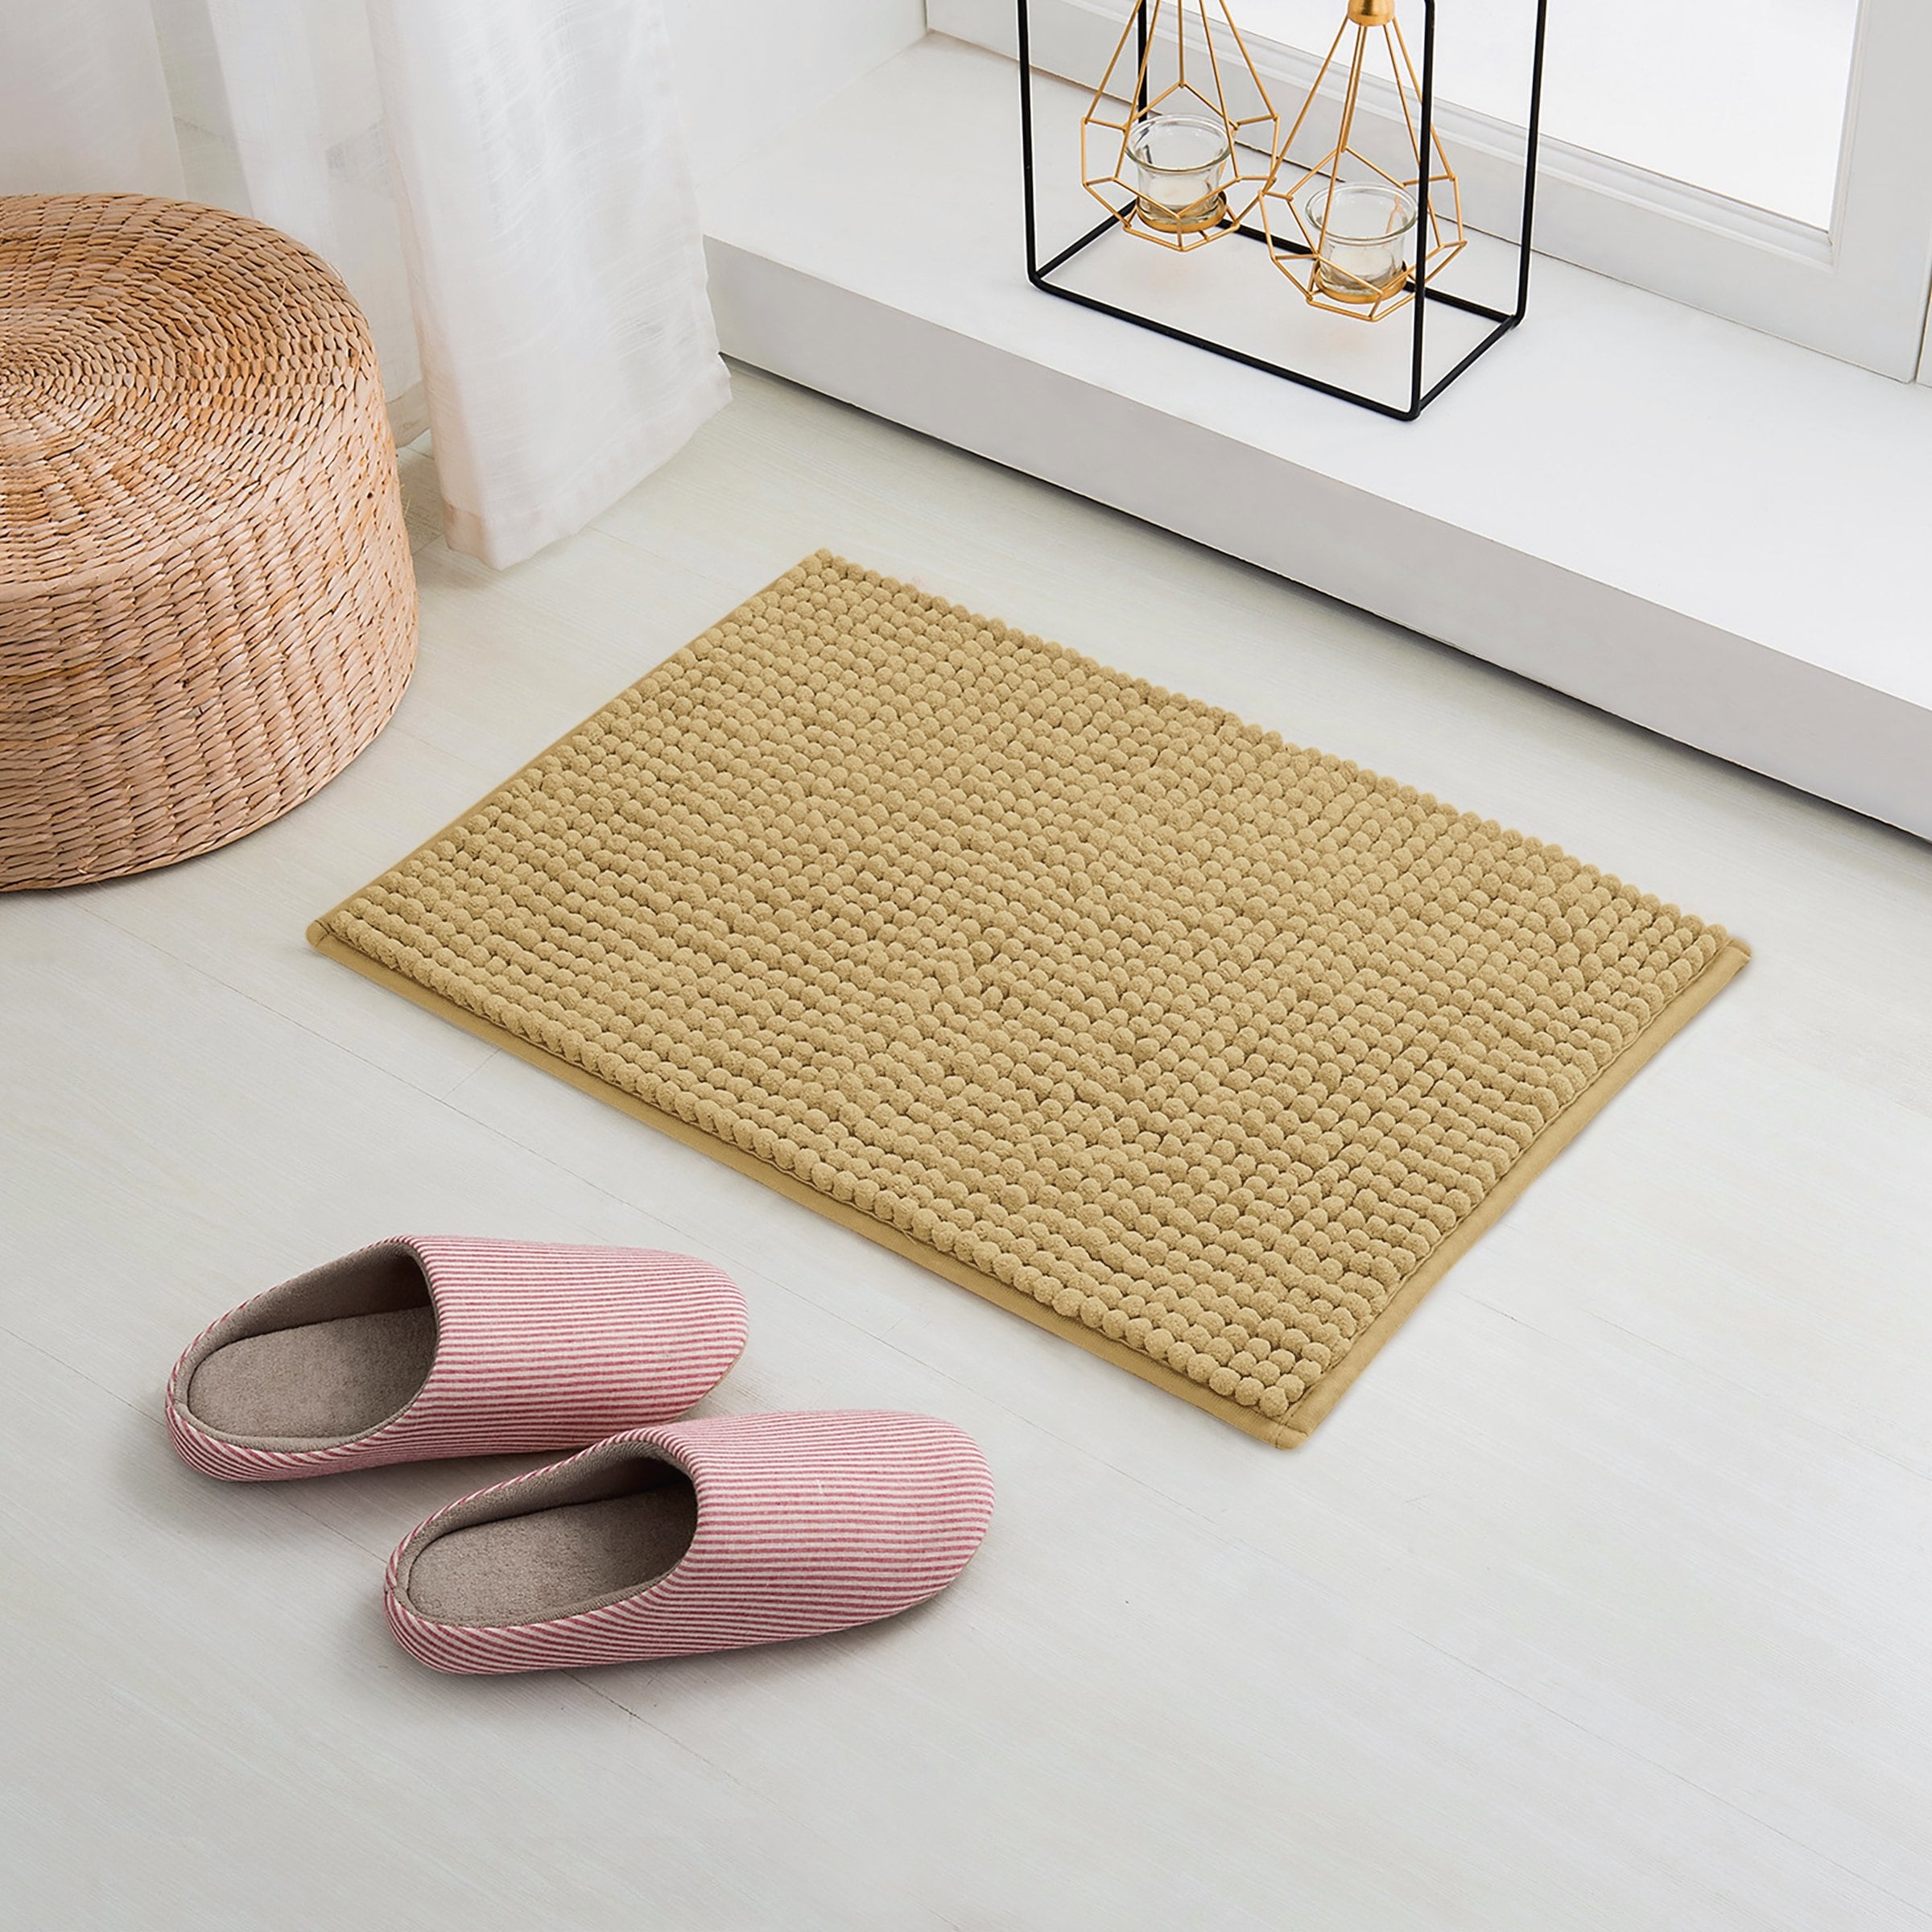 https://ak1.ostkcdn.com/images/products/is/images/direct/93e5d43f0d1ef26600f3e76e59ce316635835c81/Subrtex-Chenille-Bathroom-Rugs-Soft-Super-Water-Absorbing-Shower-Mats.jpg